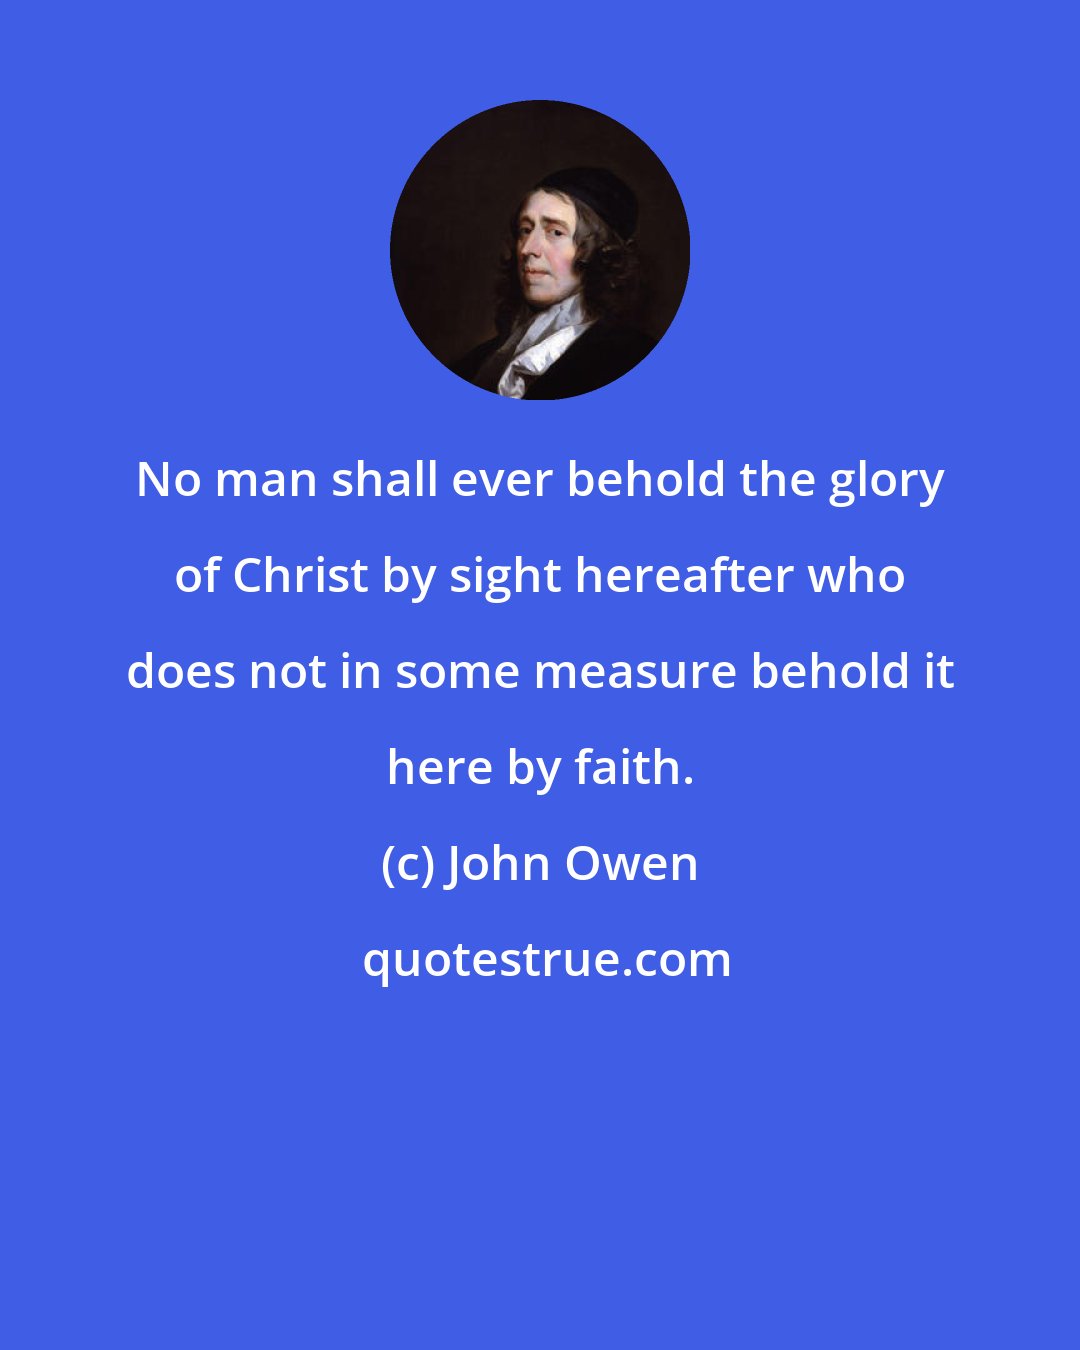 John Owen: No man shall ever behold the glory of Christ by sight hereafter who does not in some measure behold it here by faith.